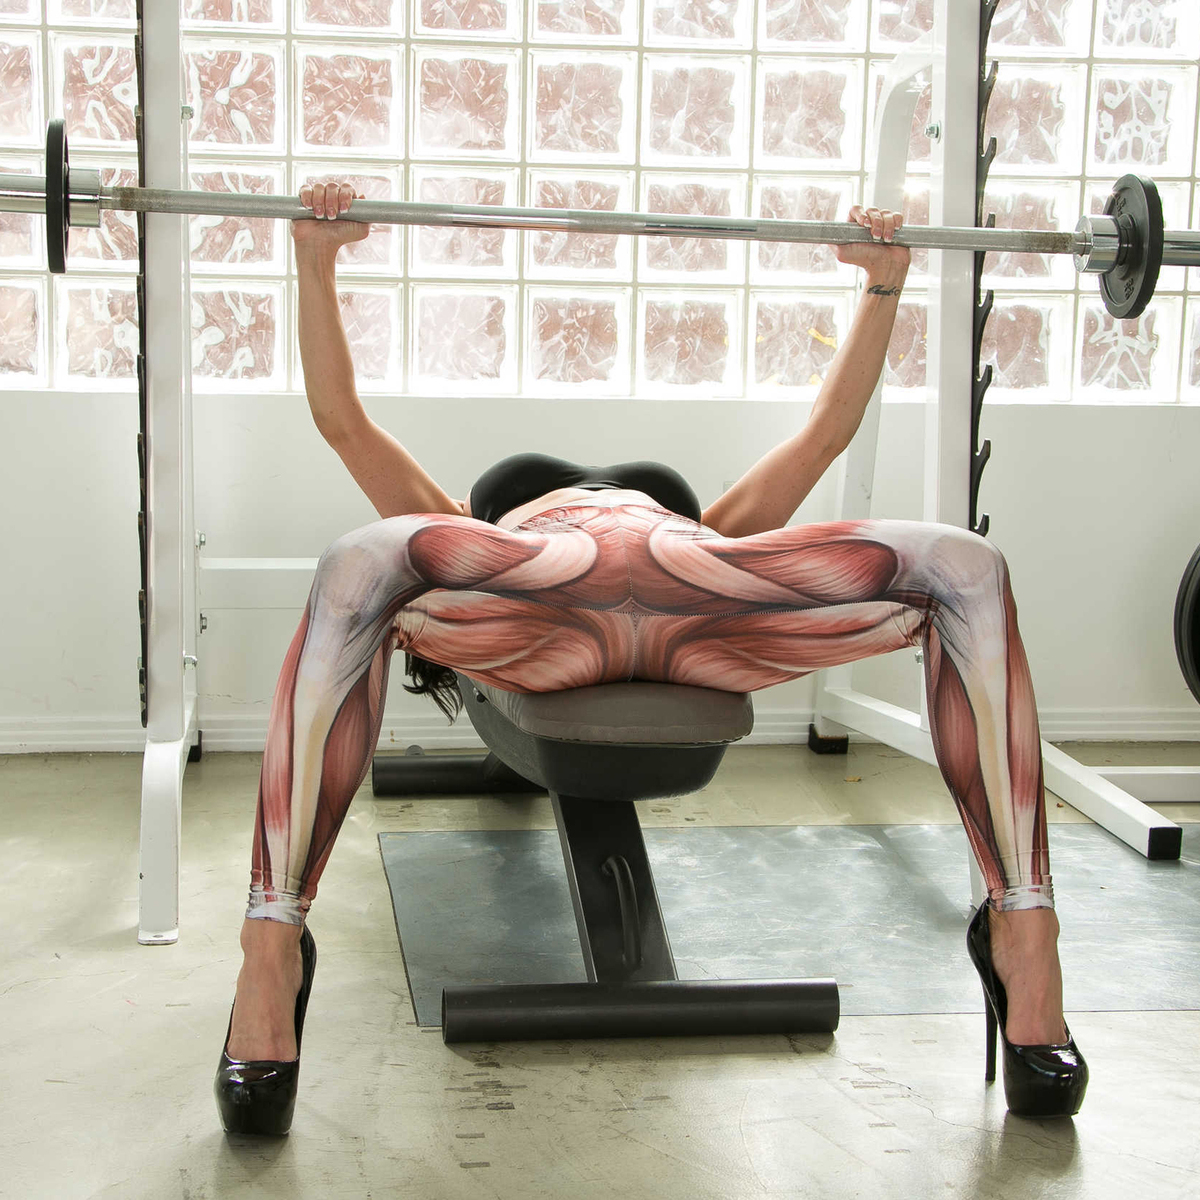 Kendra Lust Going Deep at the Gym - picture 10